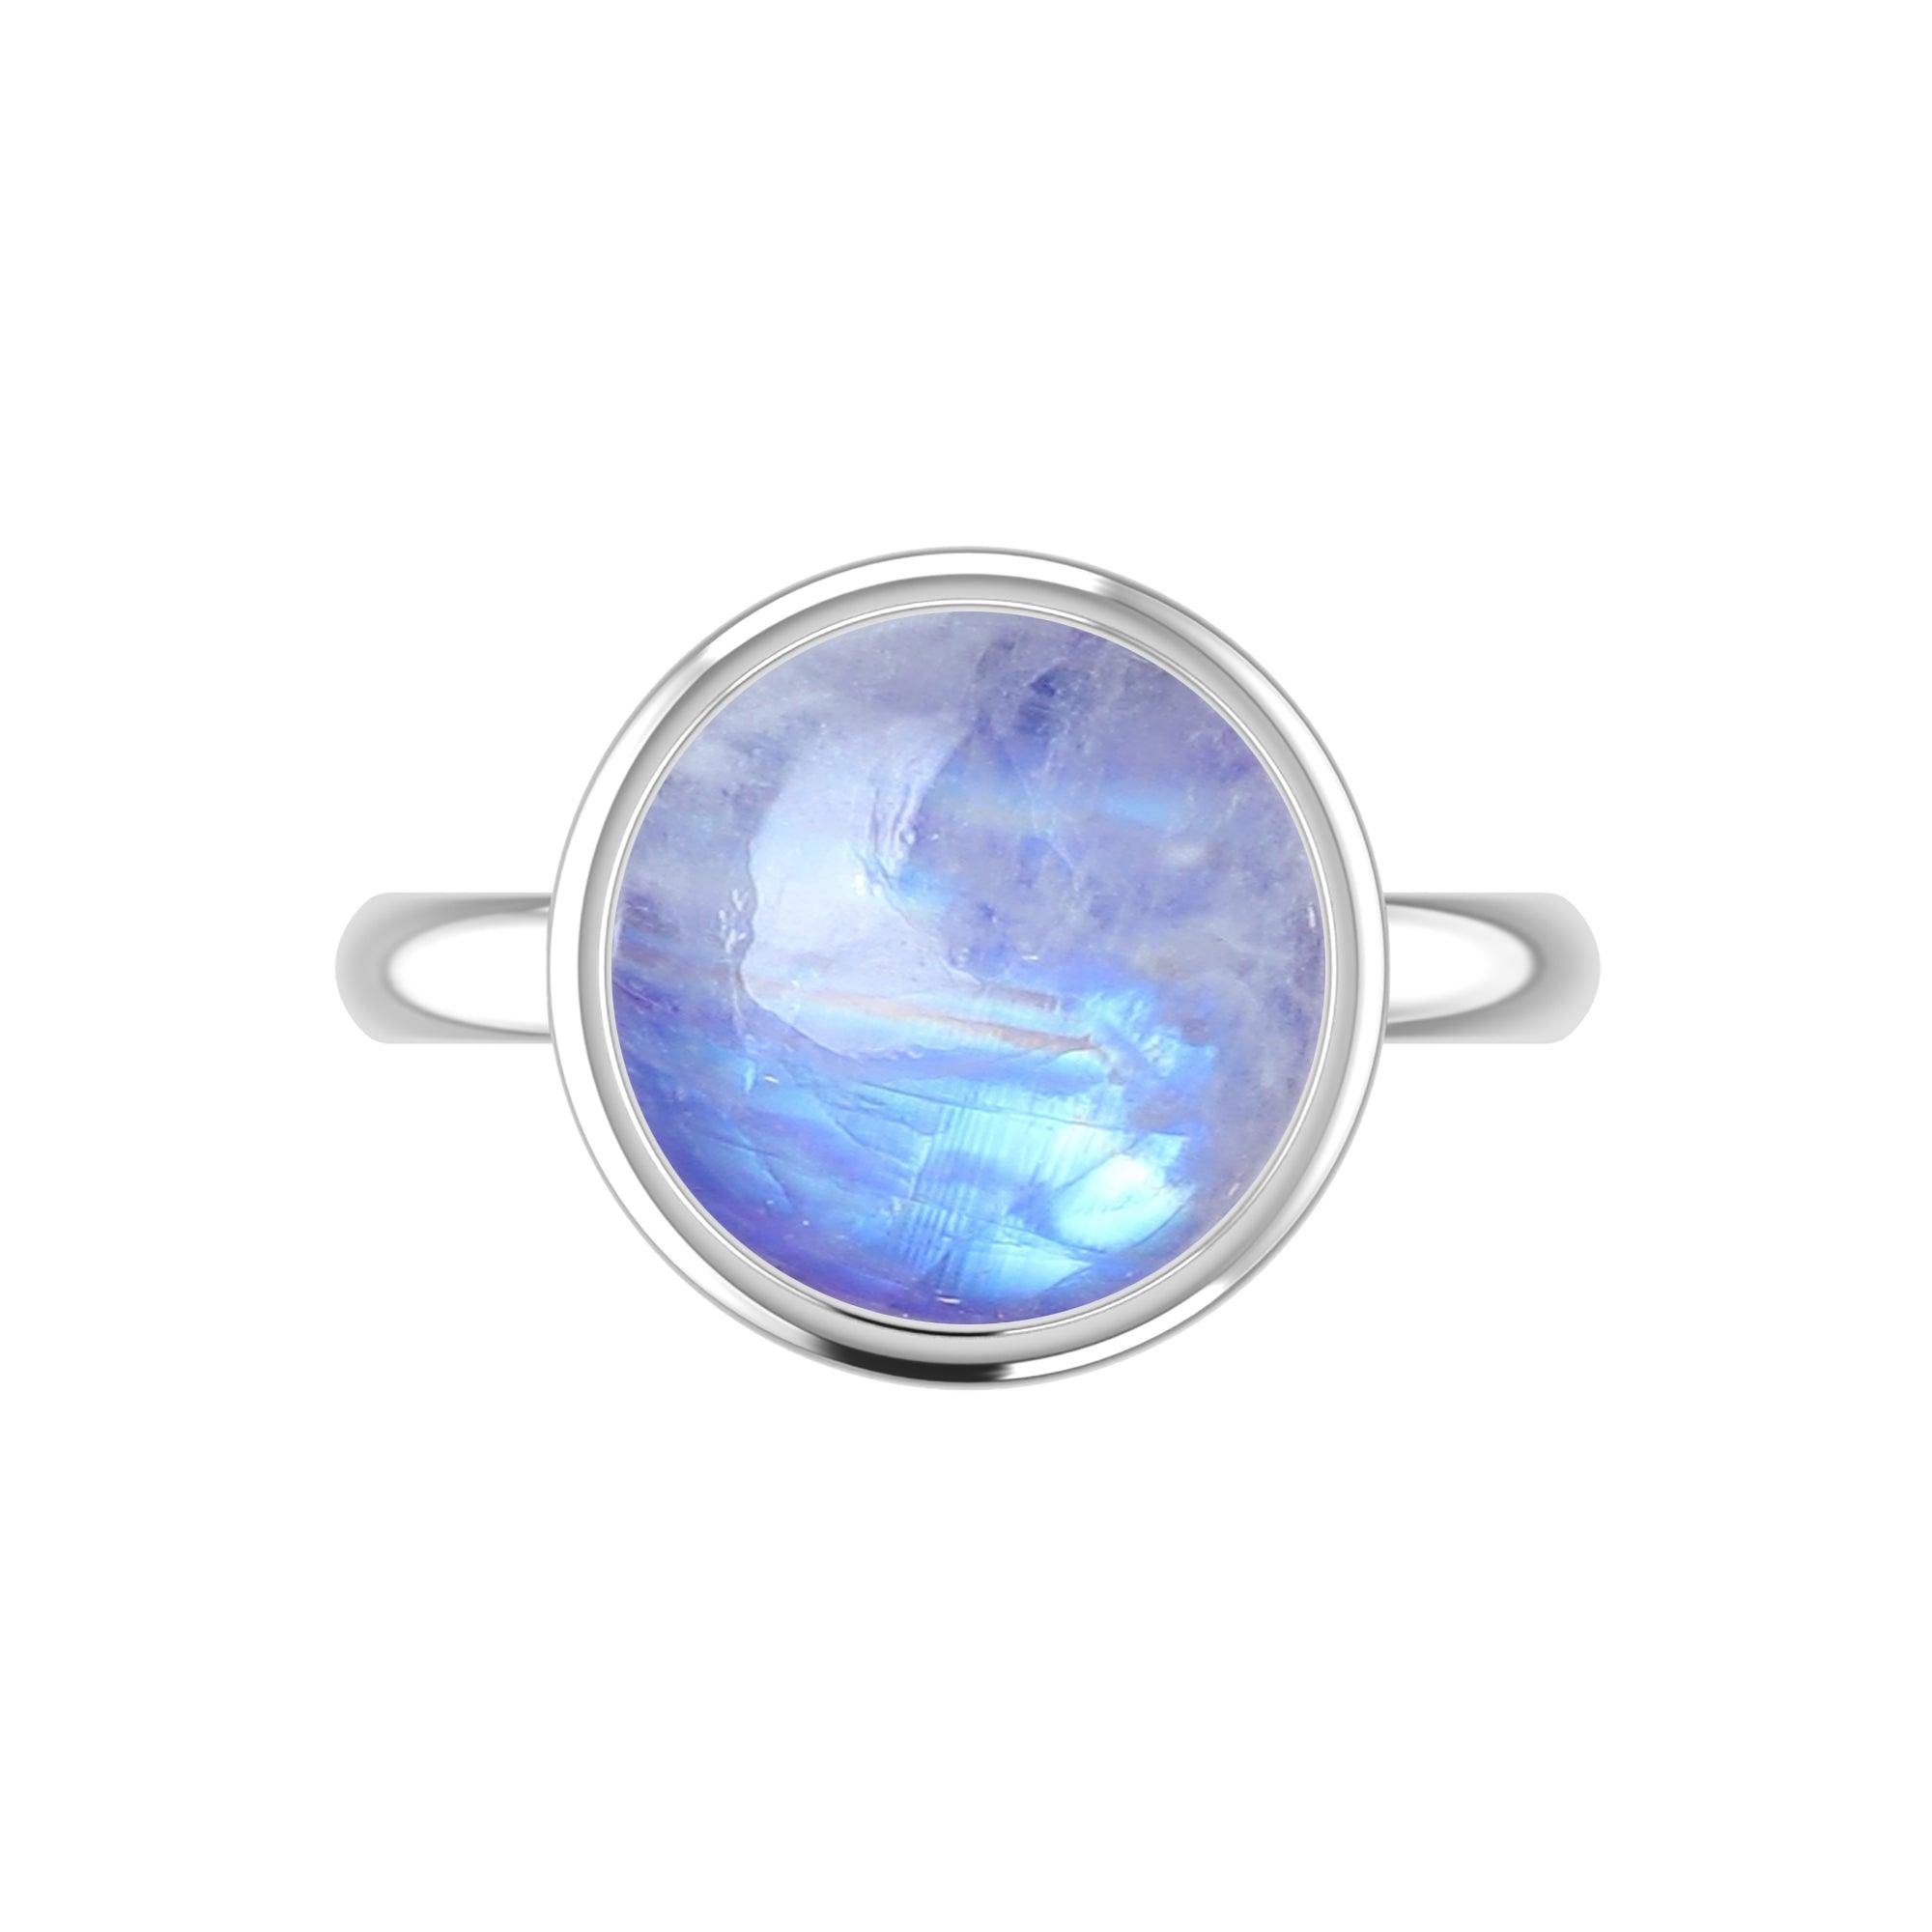 Natural Purple Moonstone Ring 925 Sterling Silver Bezel Set Handmade Jewelry Pack of 6 - (Box 4)